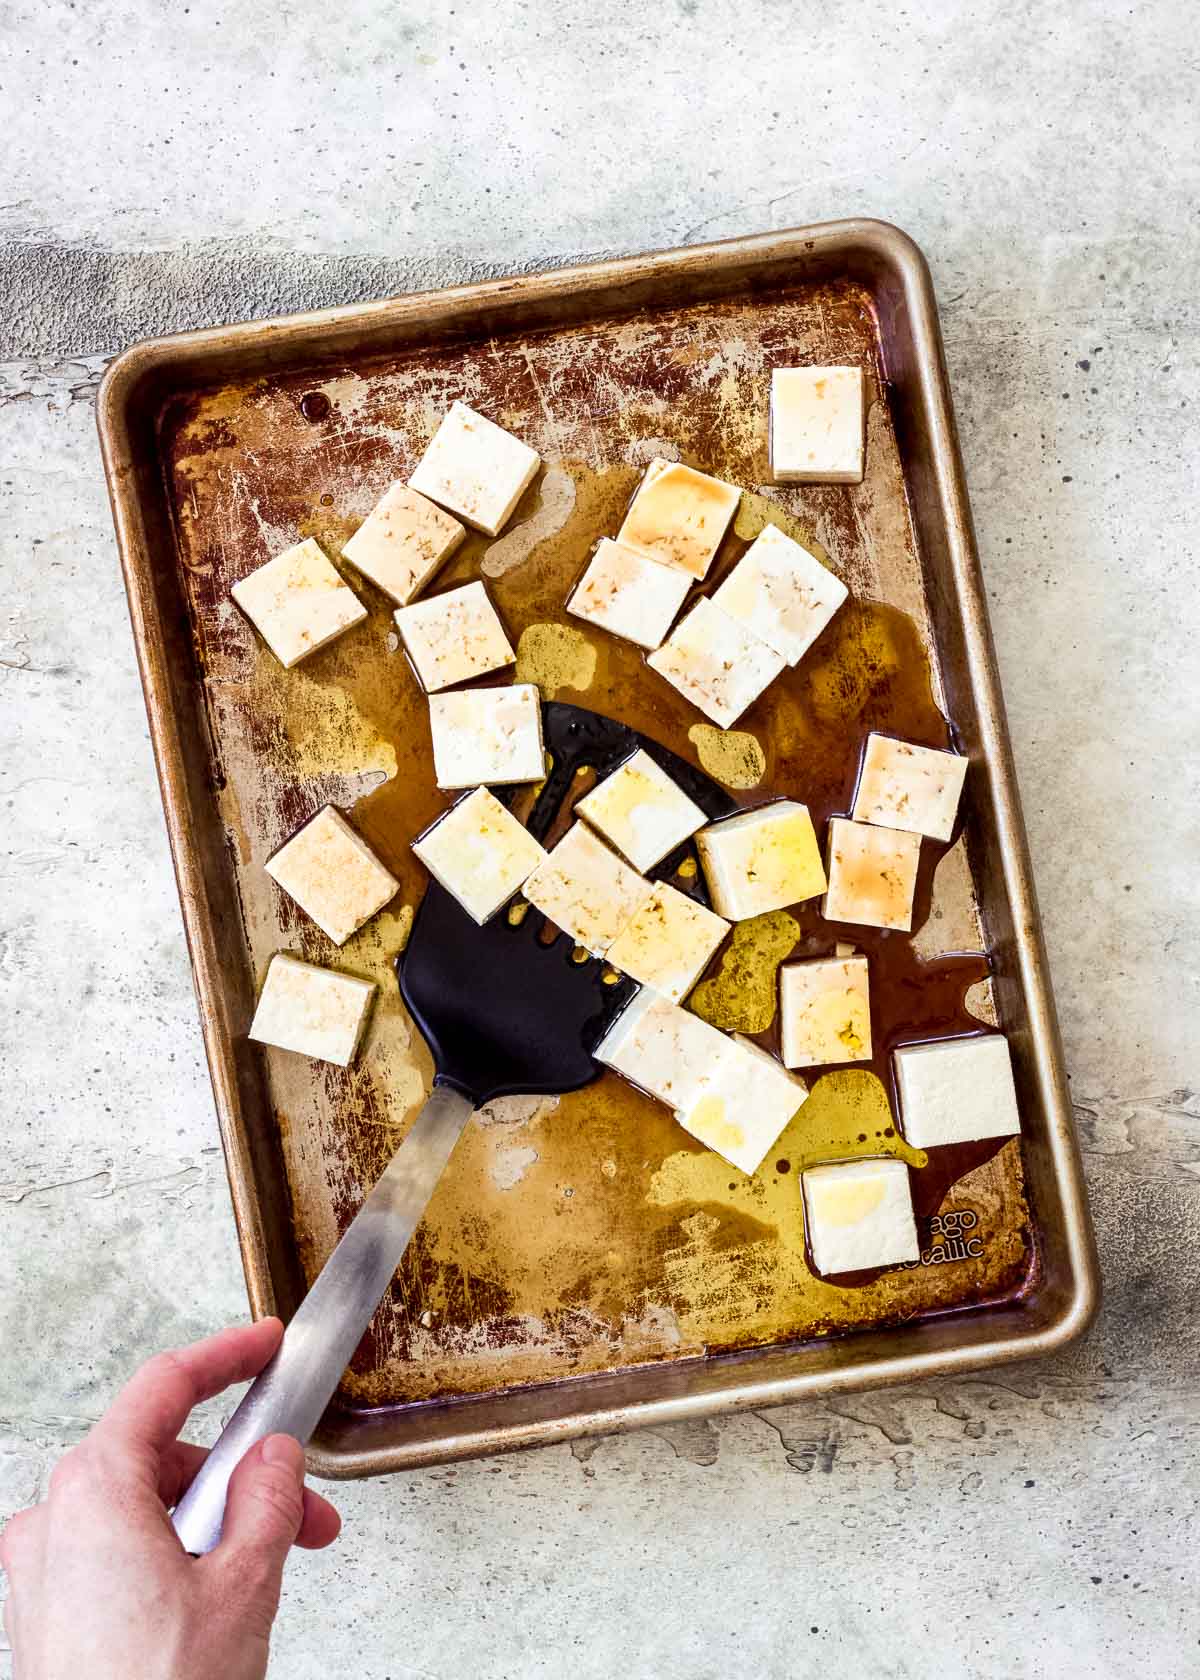 Tray of uncooked cubed tofu covered in oil and soy sauce, being flipped with spatula by female hand.